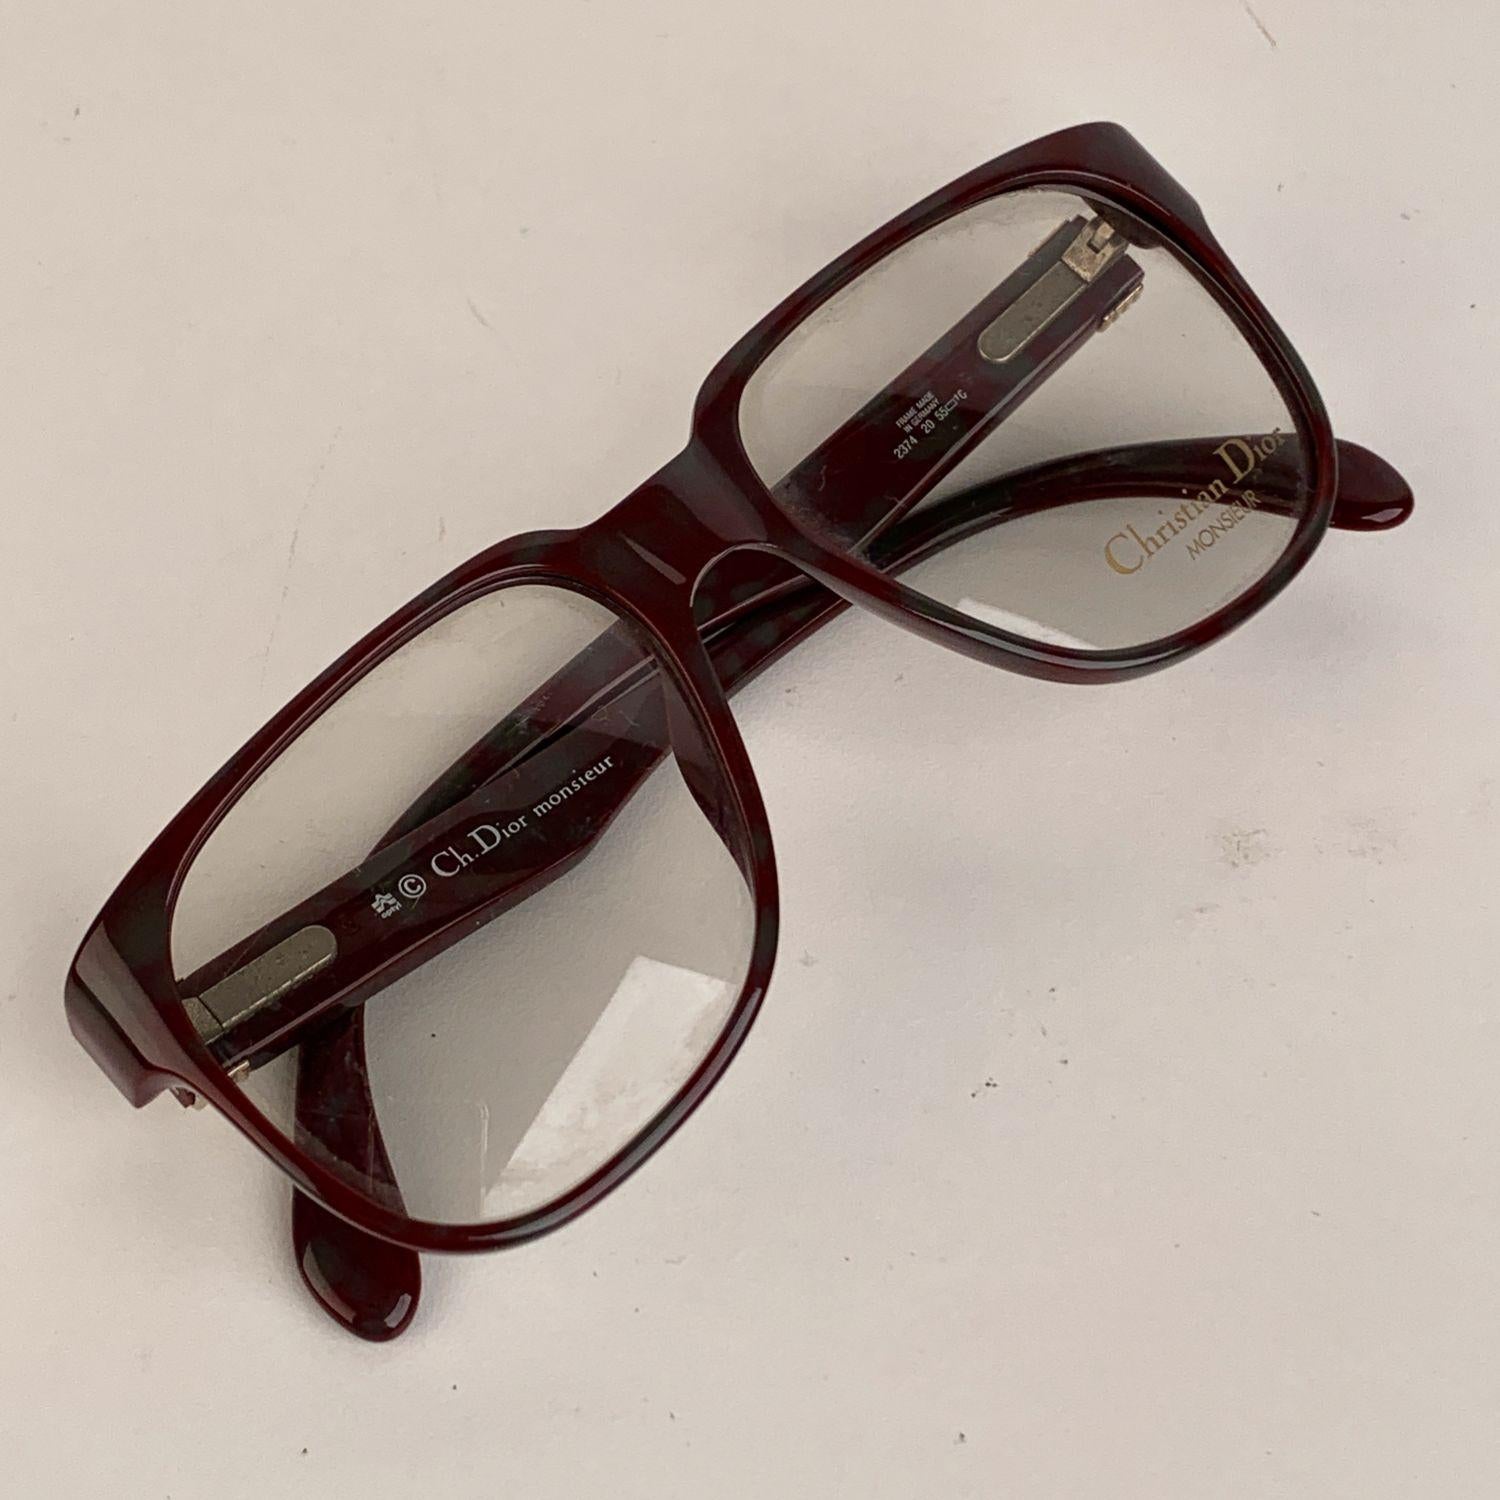 CHRISTIAN DIOR Monsieur Vintage Optyl frame with original Christian Dior clear demo lenses (signed). Brown frame with light Camouflage effect. Made in Germany. Silver metal CD - CHRISTIAN DIOR logo on temples. Mod & refs: 2374 - 20 -